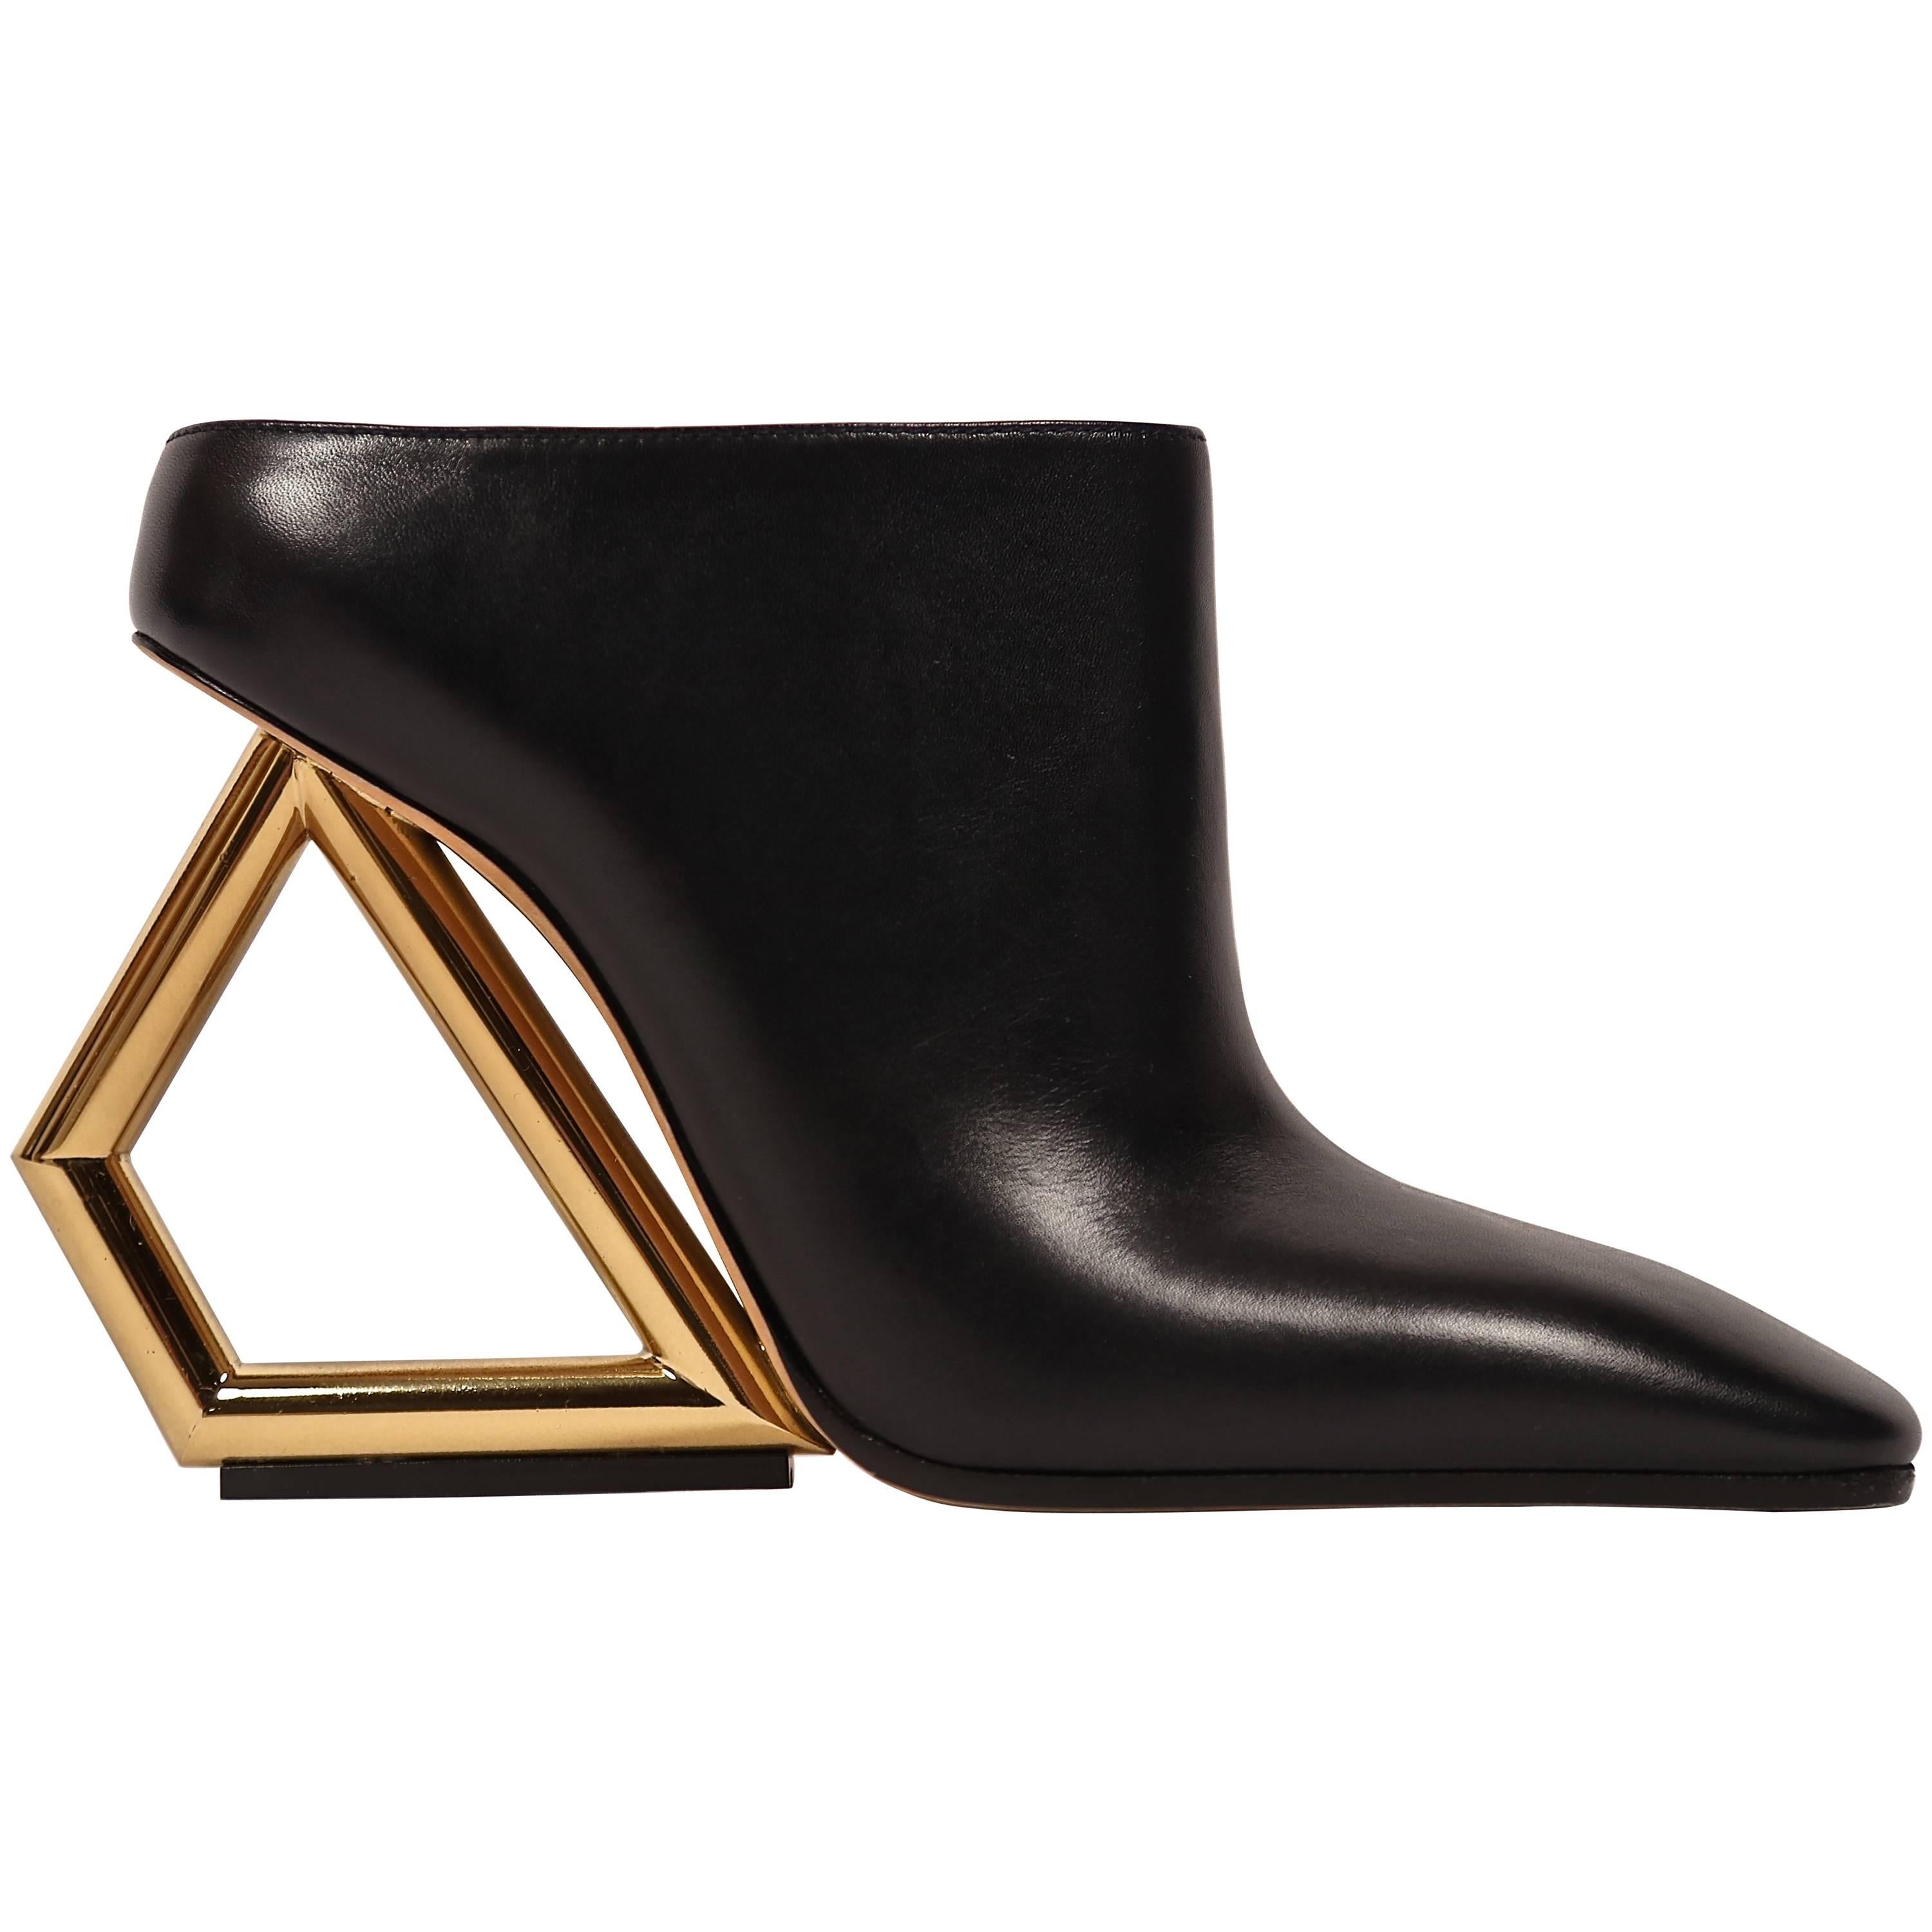 CELINE black leather mules with gold trapezoid heels - runway 2014